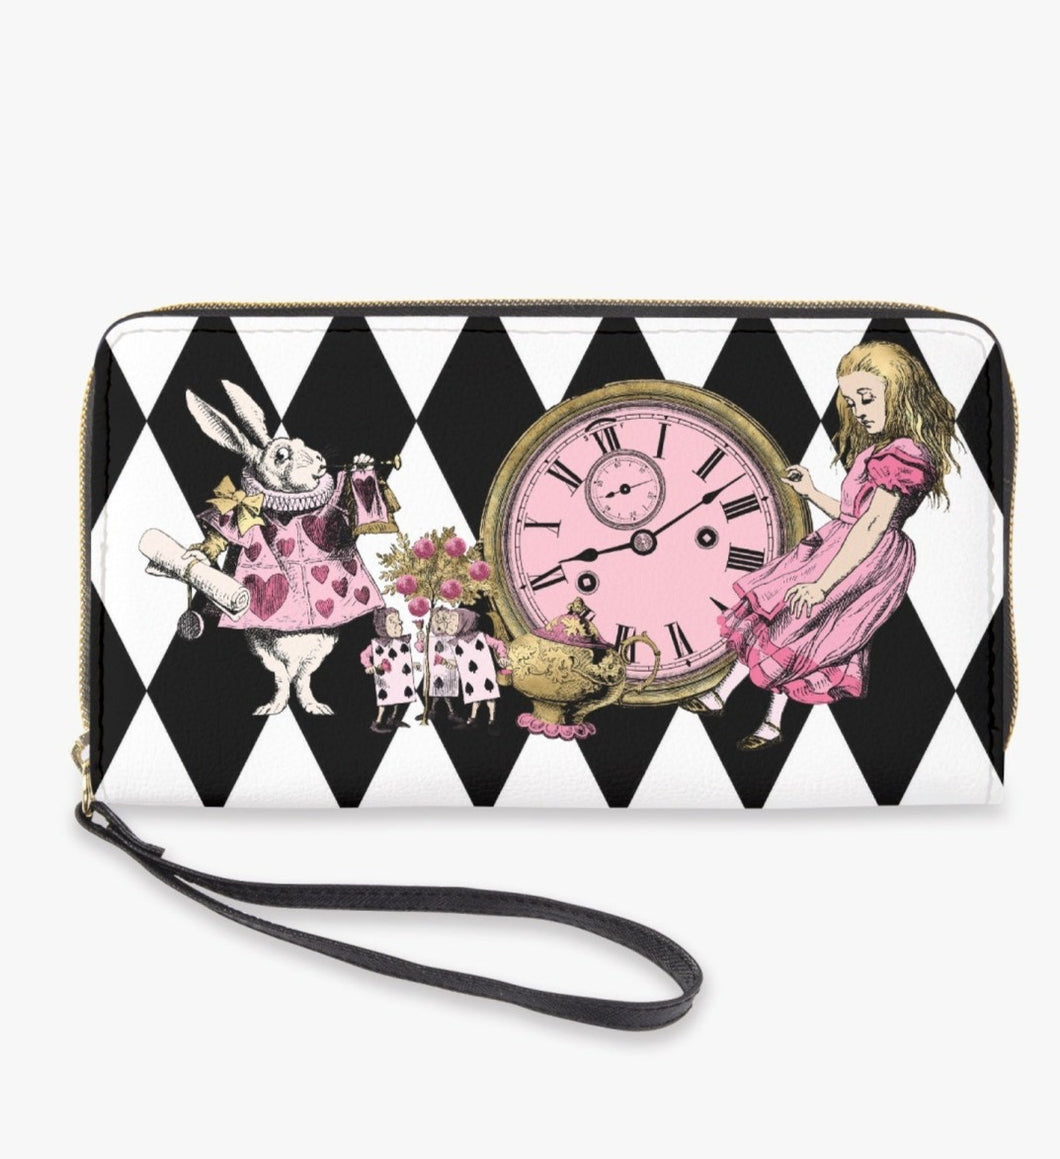 Alice In Wonderland Clutch Purse Wallet - Alice Falling Down the Rabbithole Pink and Gold (JPZWP1)